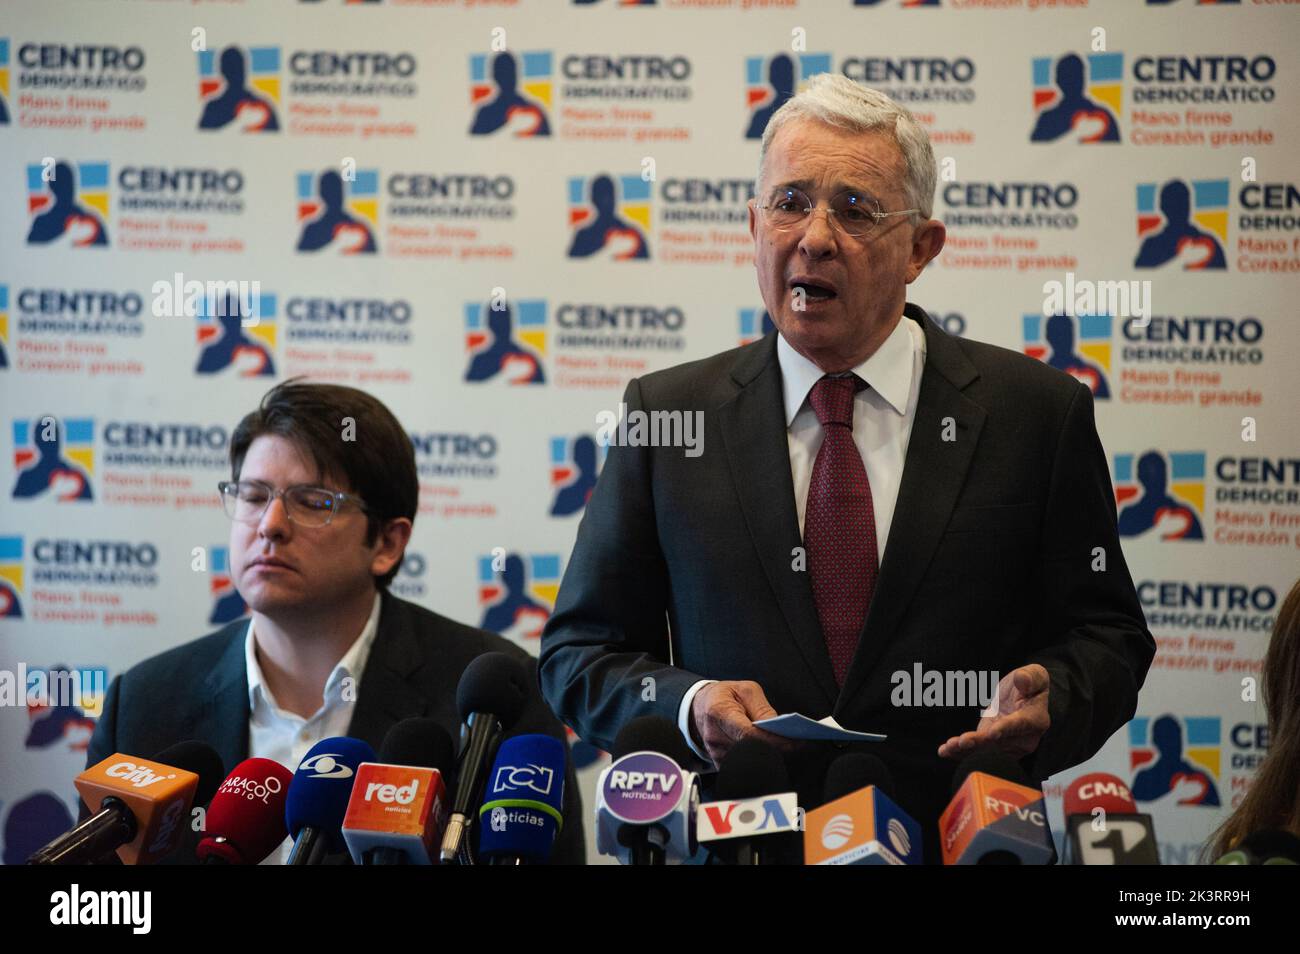 Senator Miguel Uribe Turbay (L) reacts as Colombia's former president Alvaro Uribe Velez (2002-2006) speaks during a press conference after meeting wi Stock Photo